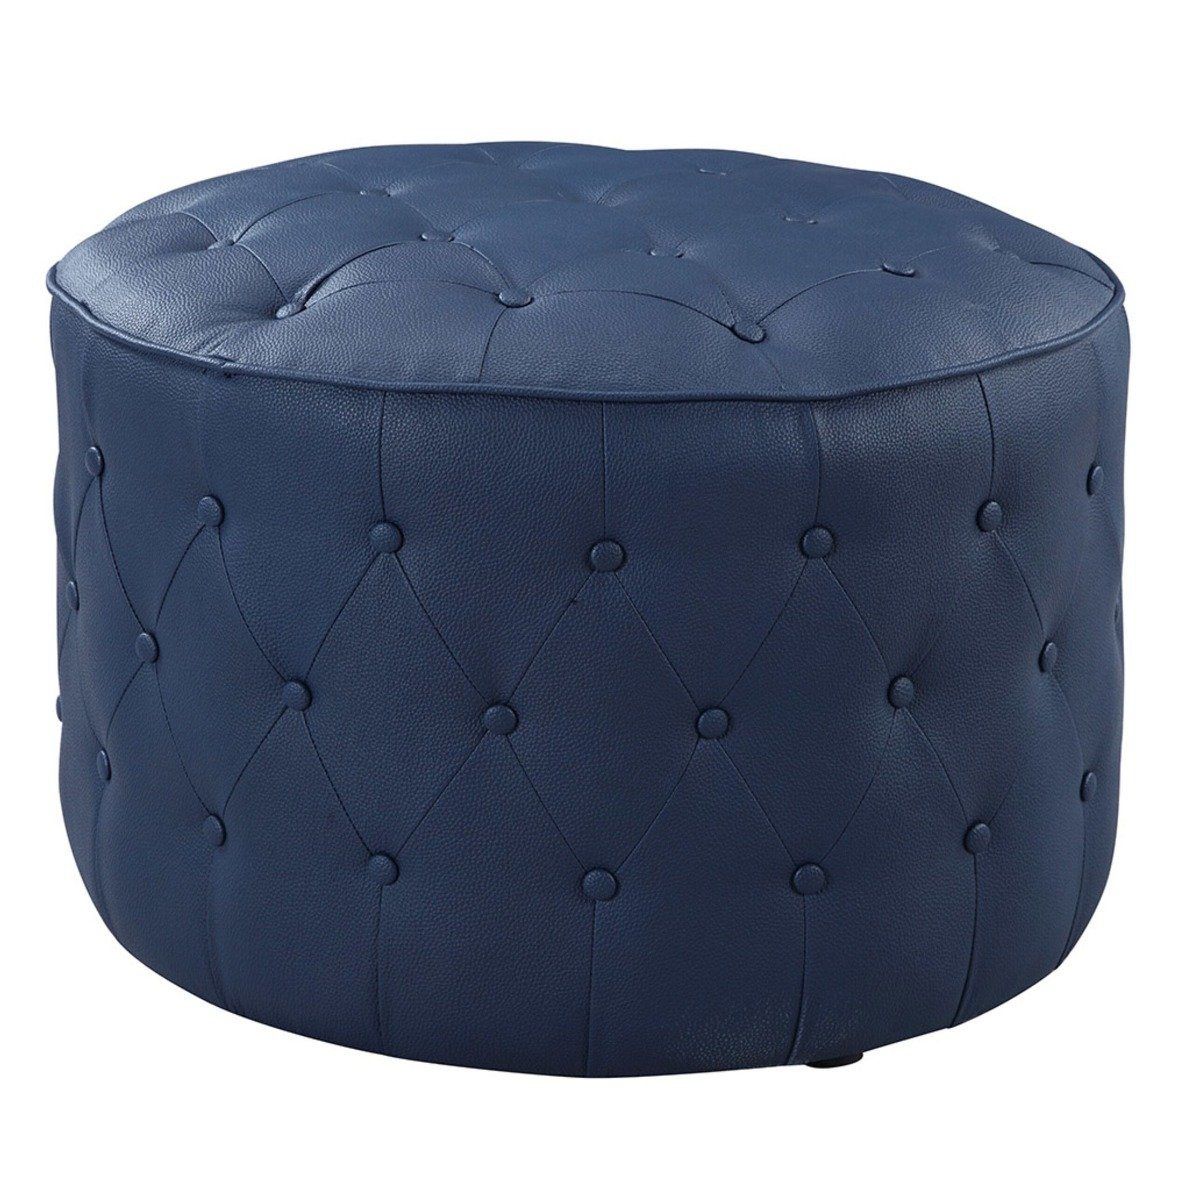 Jimmy Ottoman Button Tufted Pu Leather Upholstered Round Pouf – Walmart For Brown Leather Tan Canvas Pouf Ottomans (View 10 of 20)